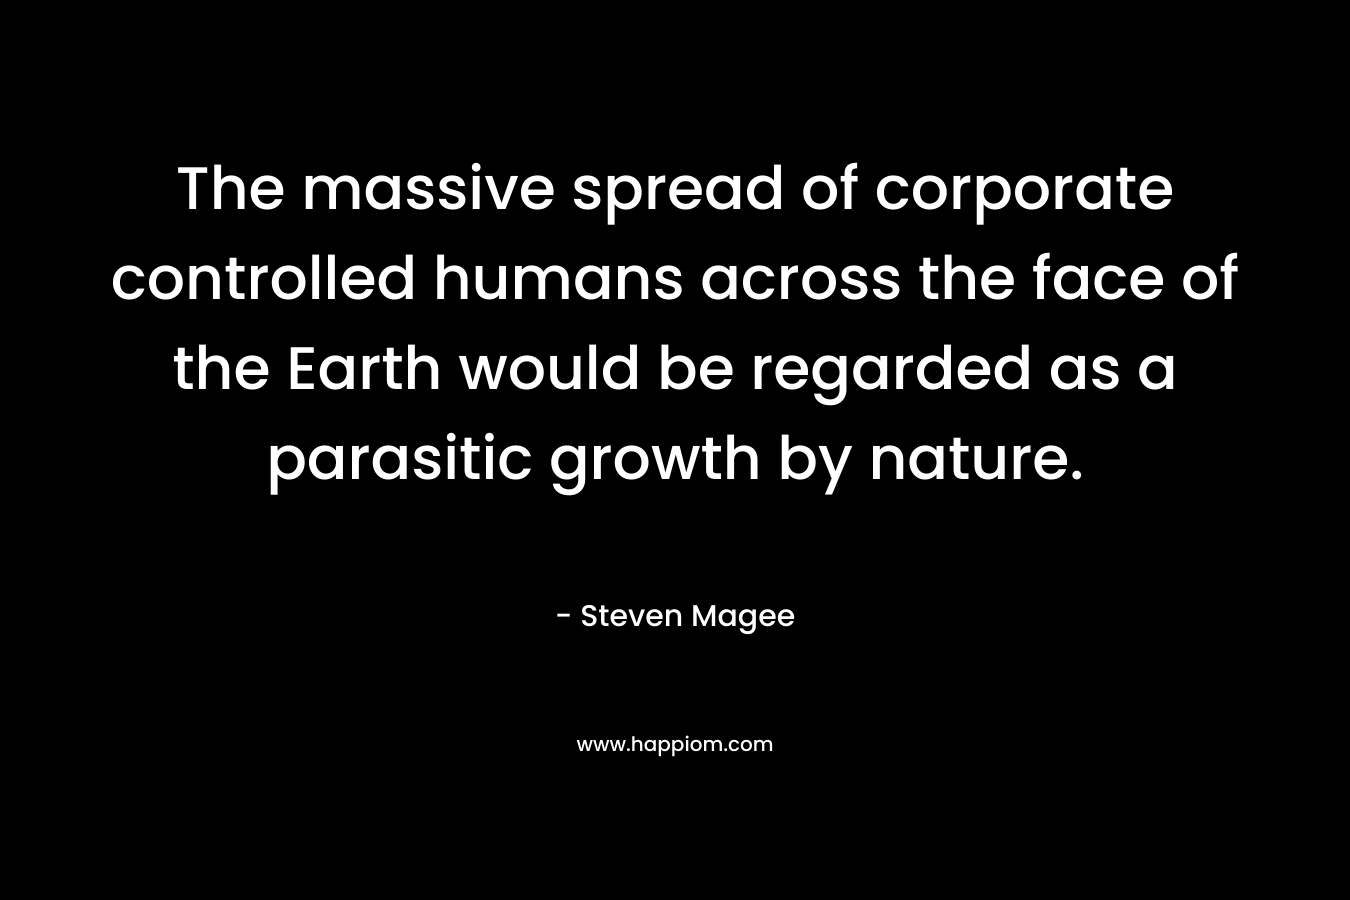 The massive spread of corporate controlled humans across the face of the Earth would be regarded as a parasitic growth by nature.